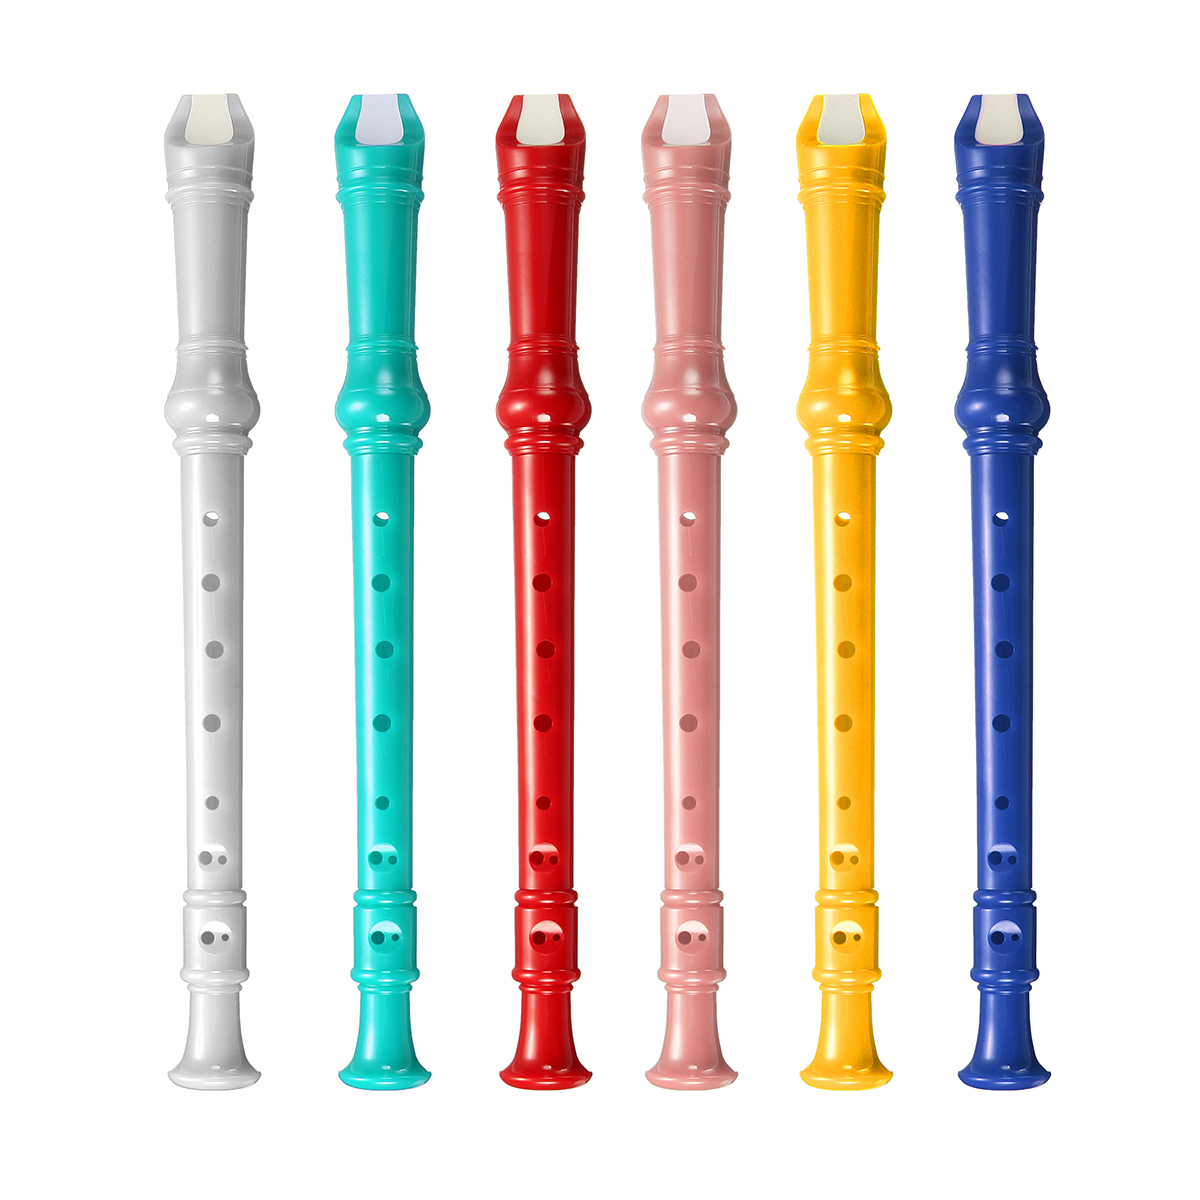 Soprano Recorder Descant 8 Hole Baroque Fingering Key of G with Cleaning Rod White Color by Elrido 